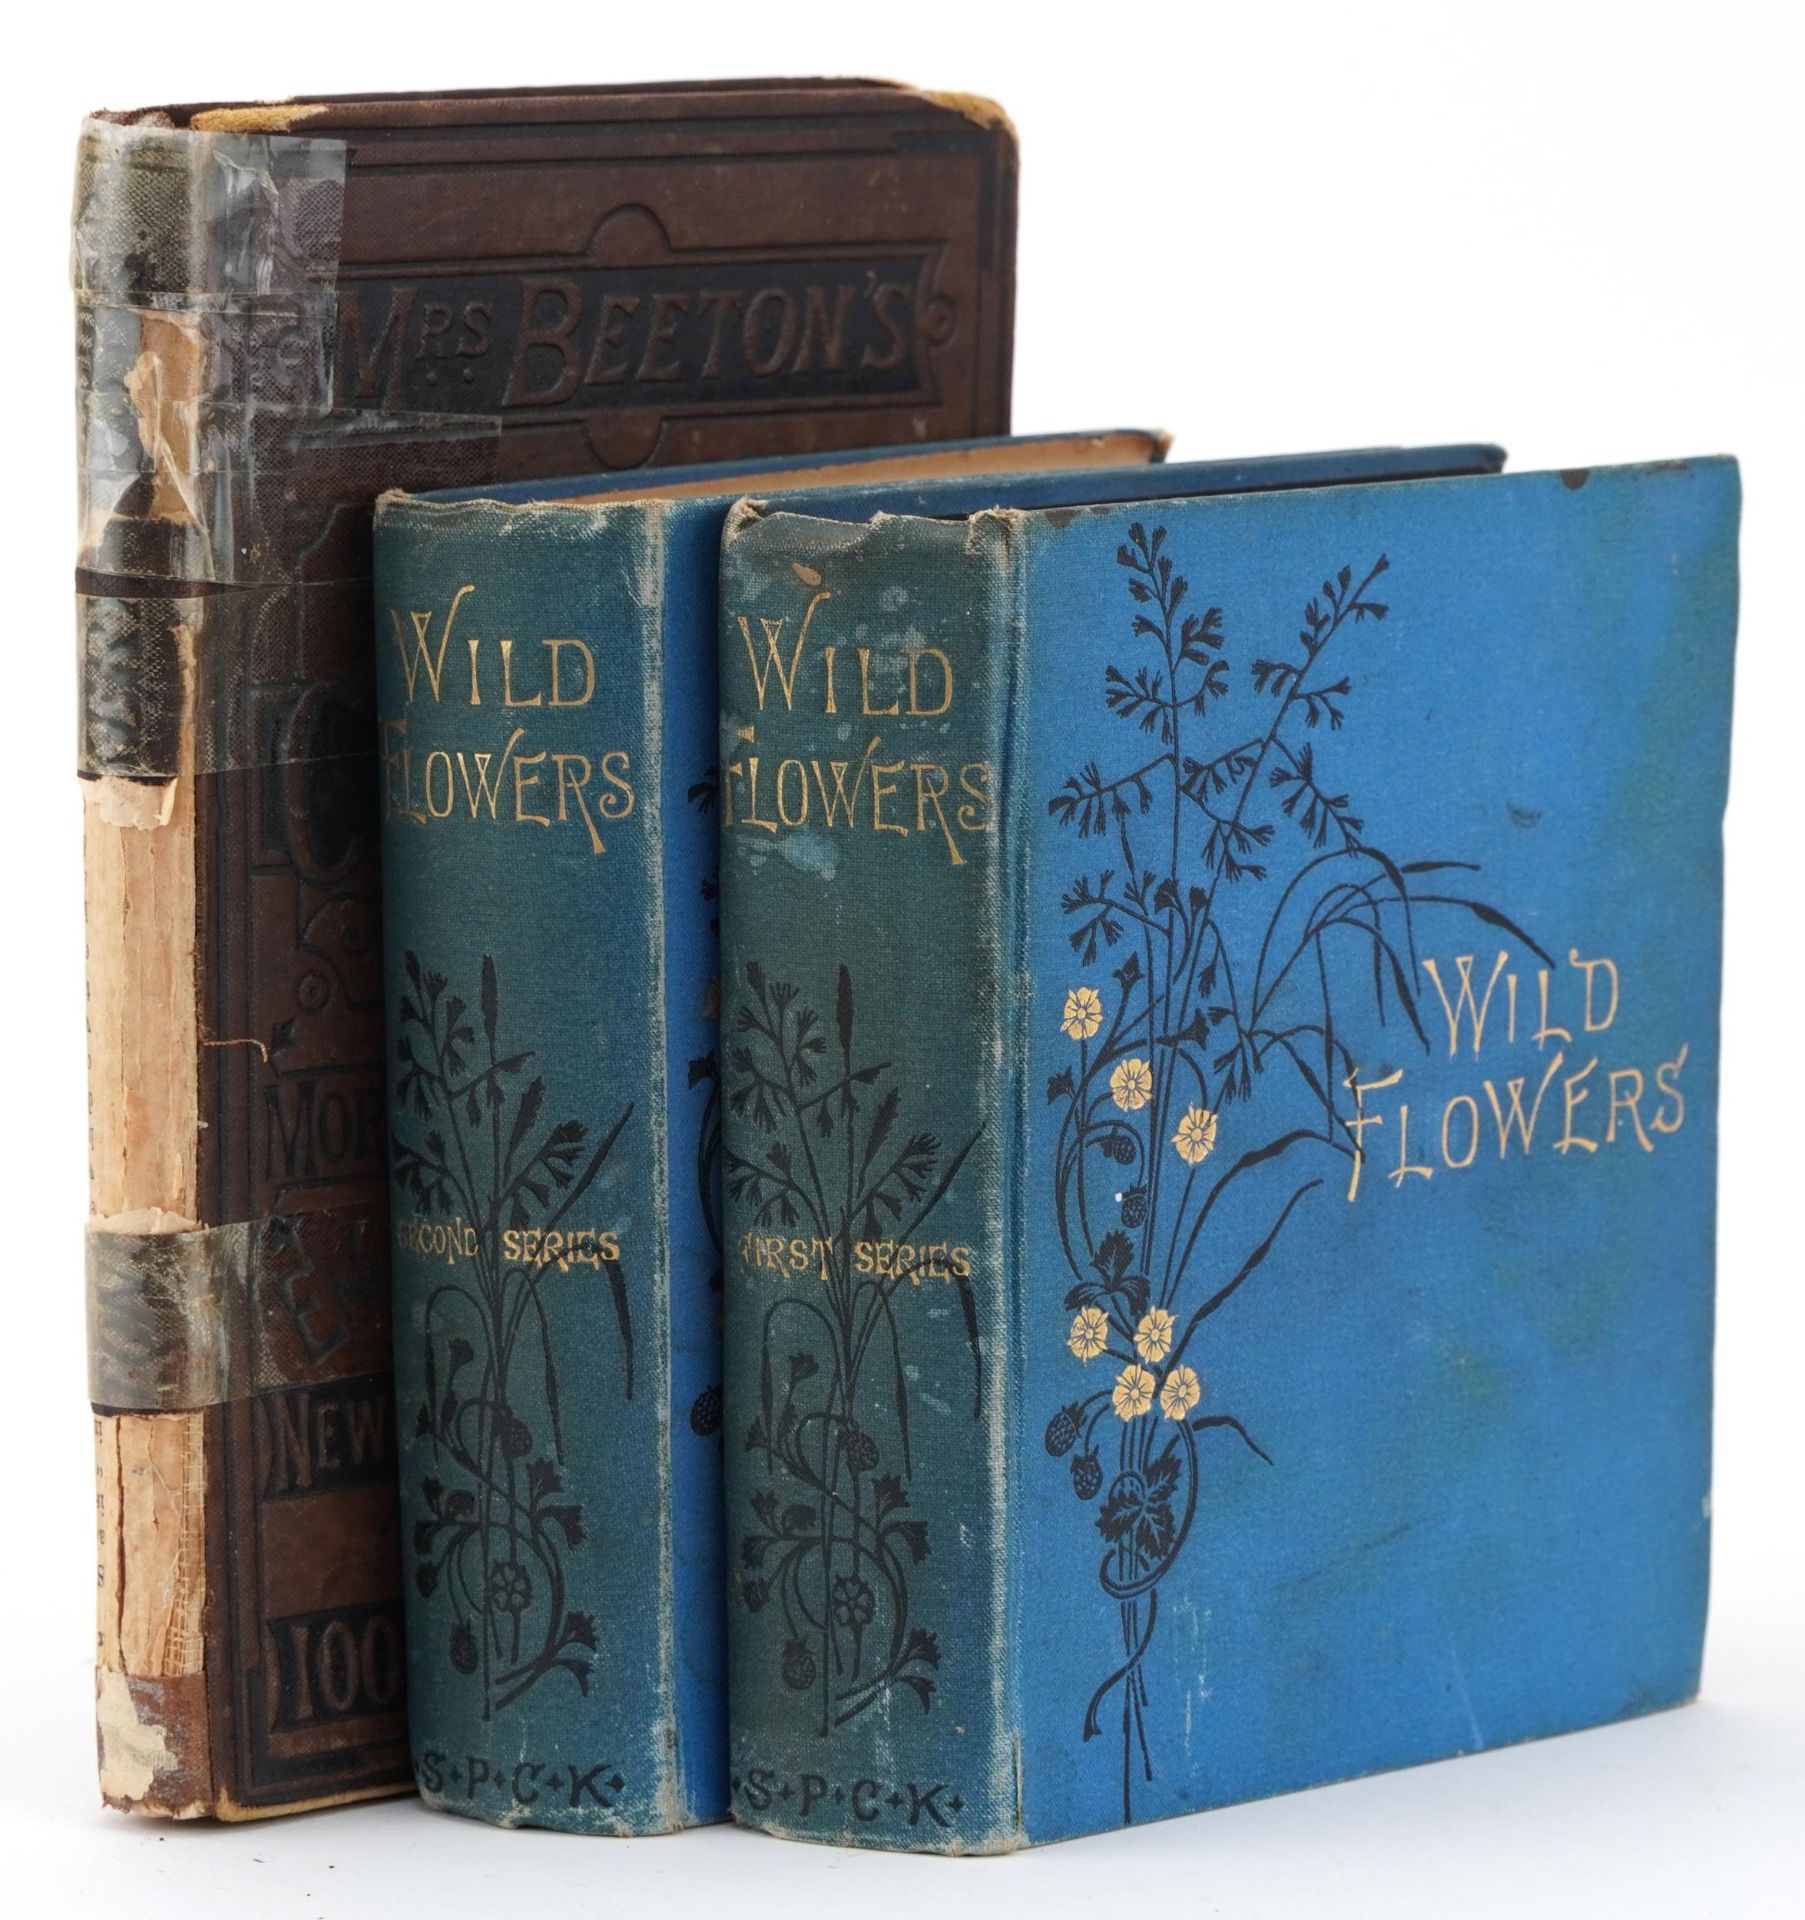 Three hardback books comprising Wild Flowers First & Second Series and Mrs Beeton's Cookery book :